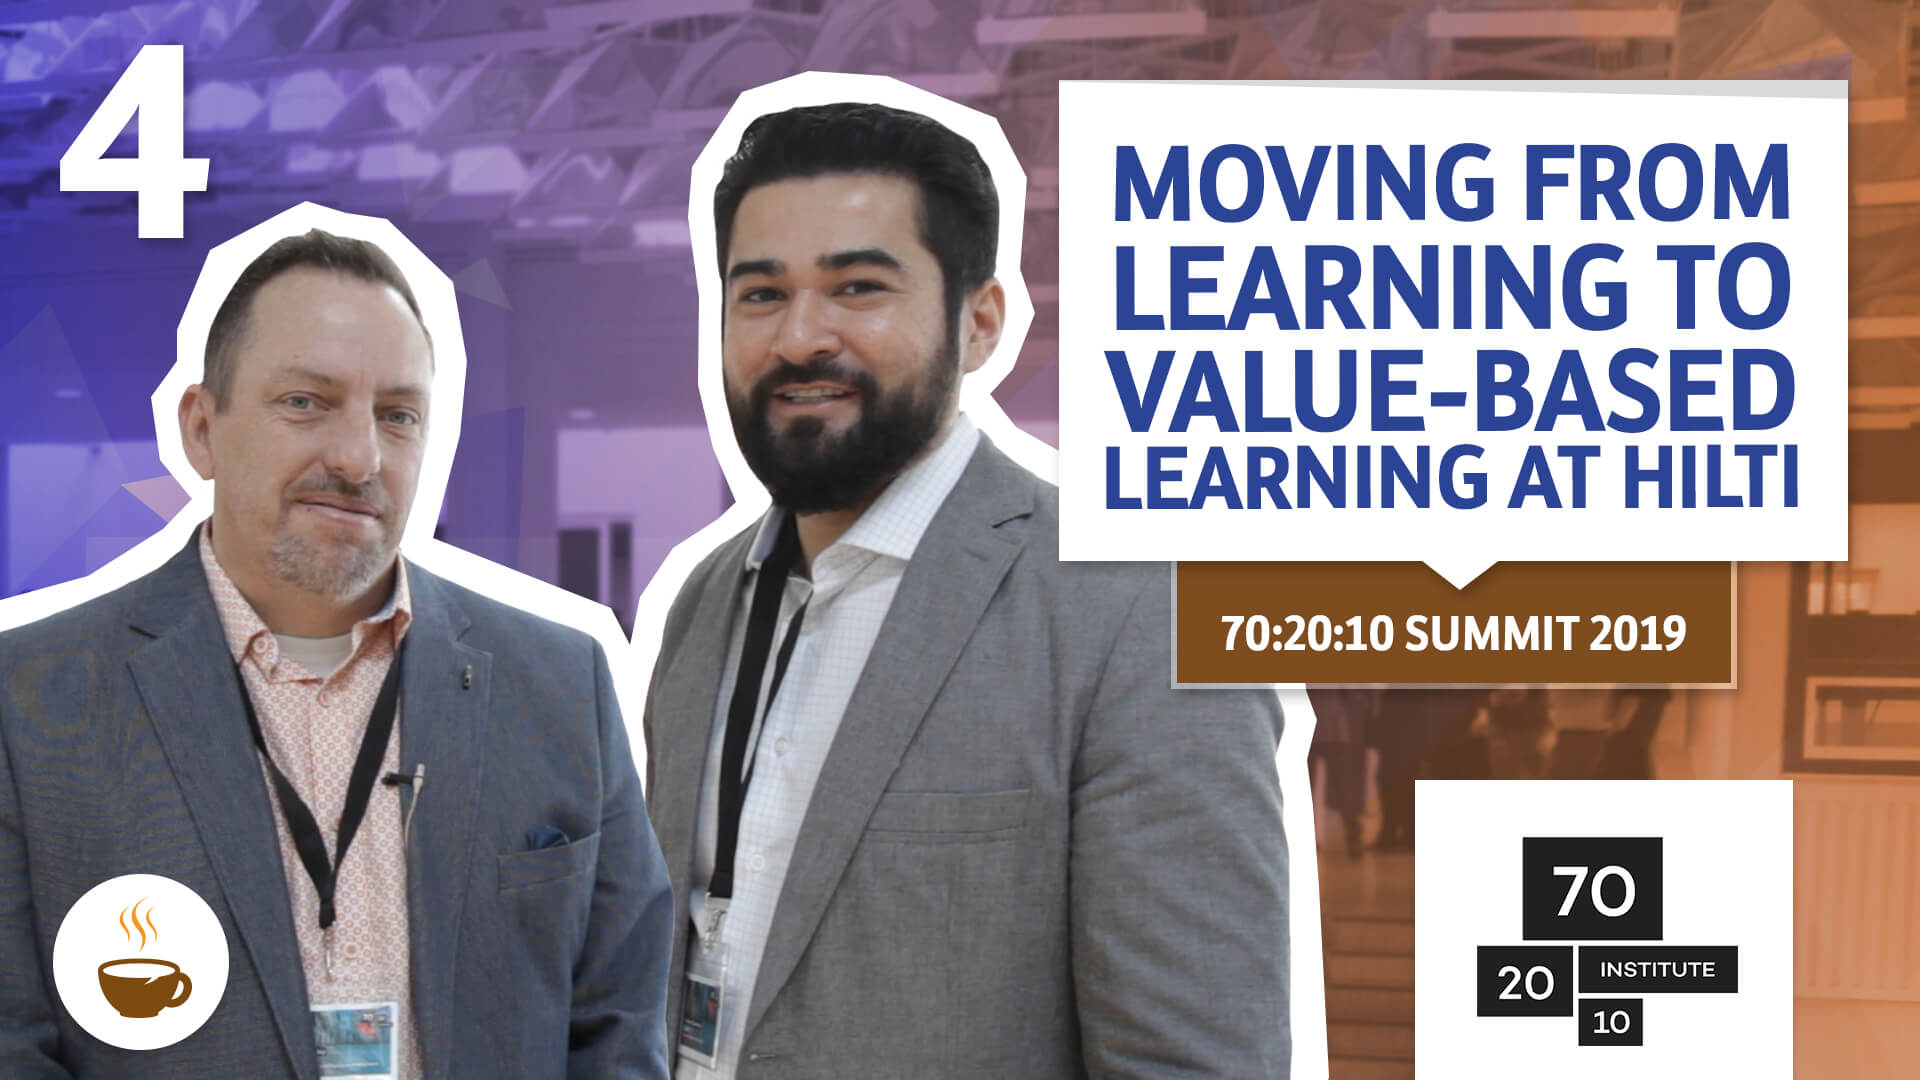 Wagner Cassimiro interviewing Tery from Hilti about Moving from learning to value-based learning at Hilti – 70:20:10 Summit, 2019